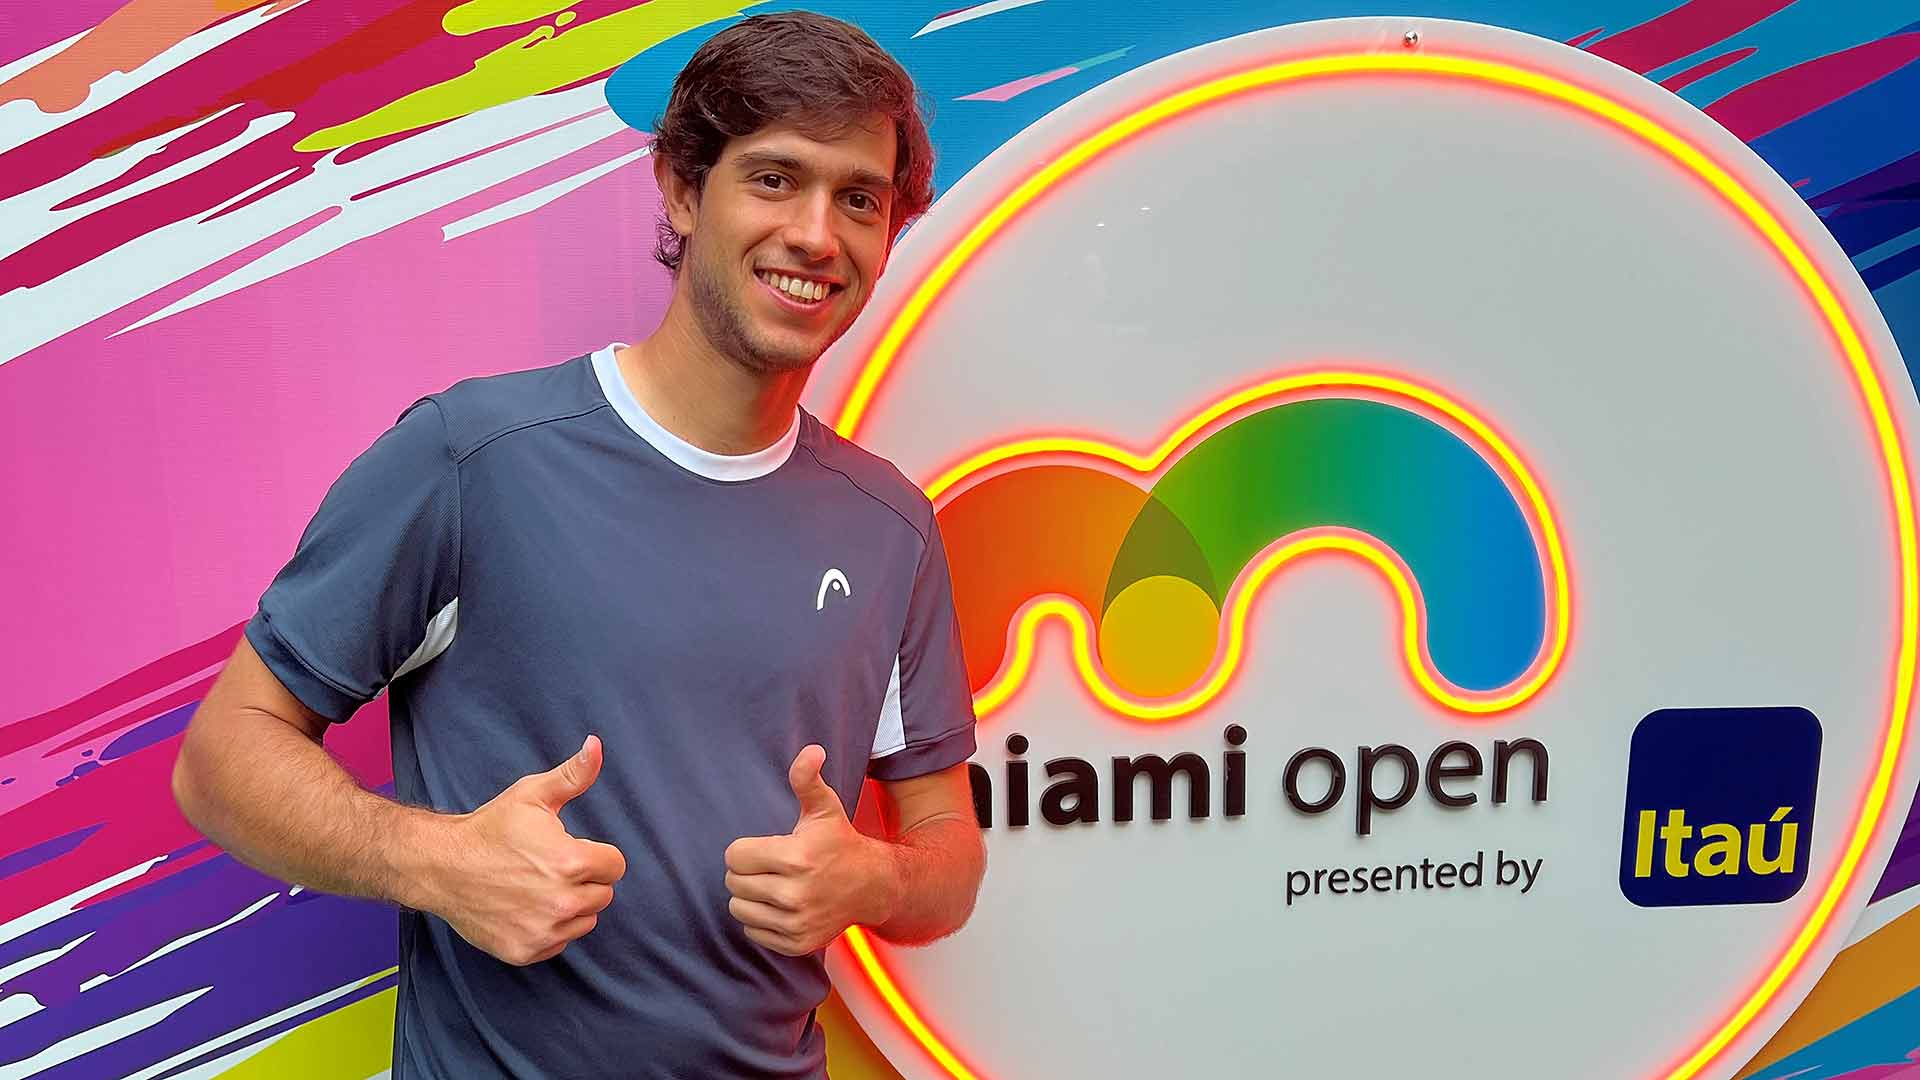 Nuno Borges celebrating his first-round qualifying win at the Miami Open presented by Itau.